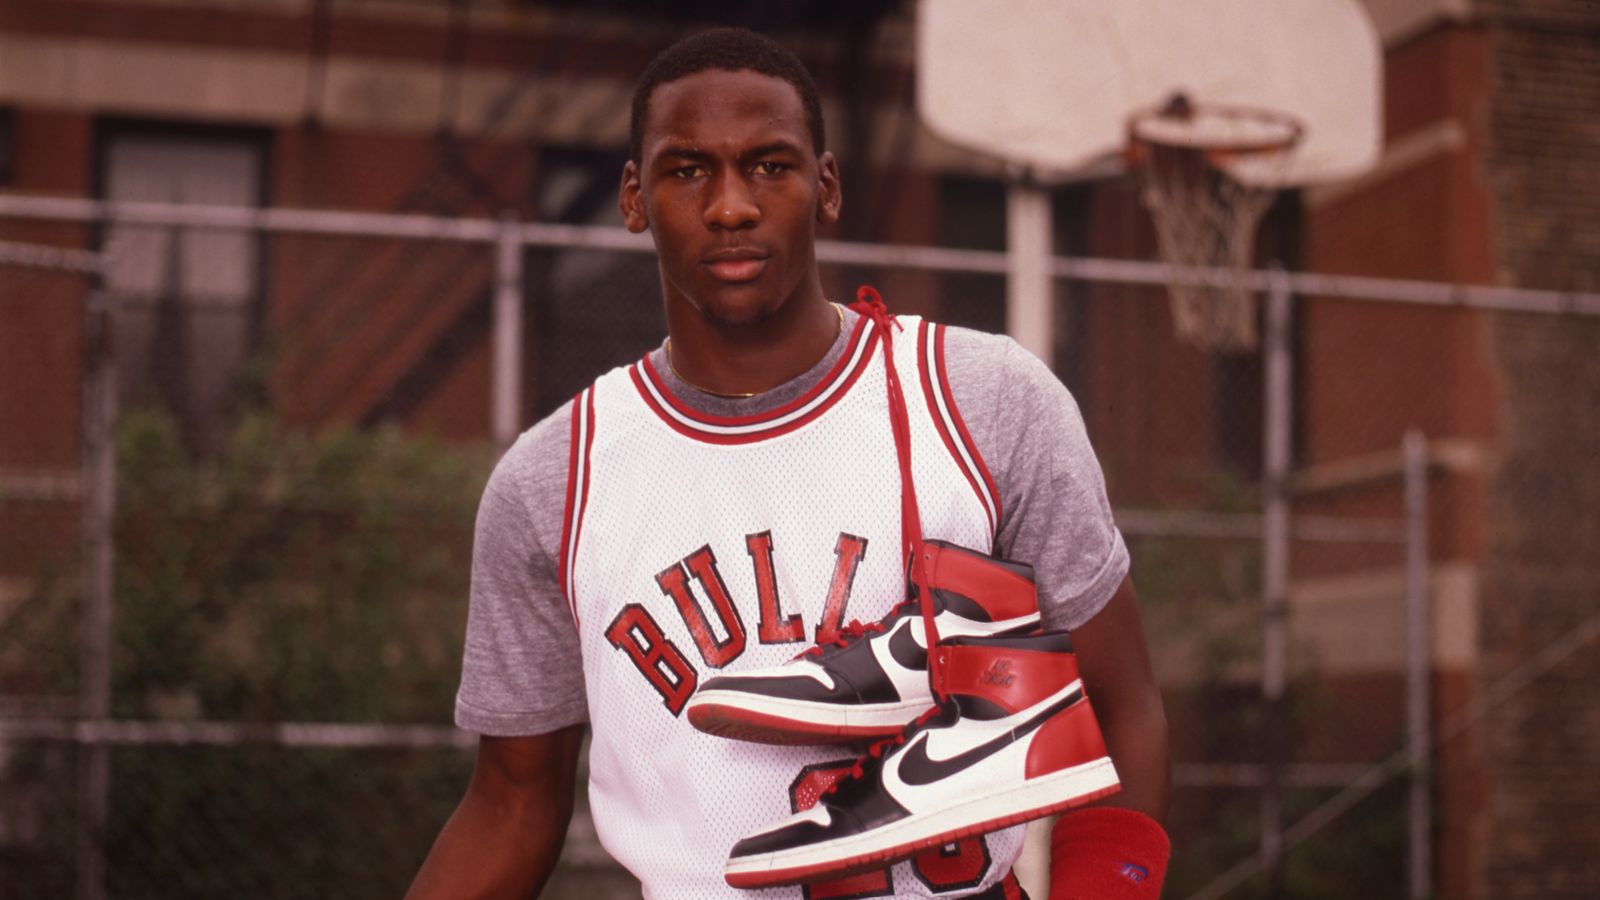 Michael Jordan made more money in 2014 than he did on the court in his entire NBA career, combined